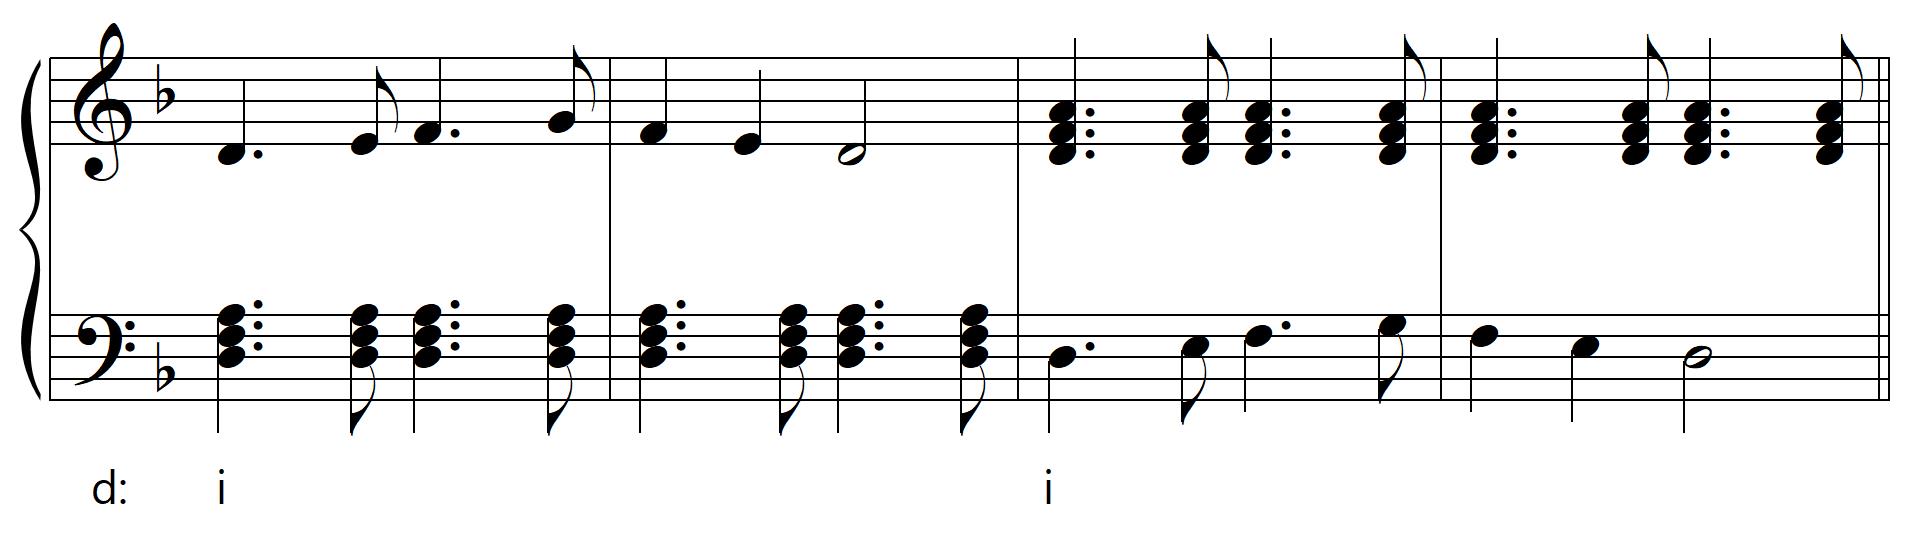 melodic bass and first inversion triads